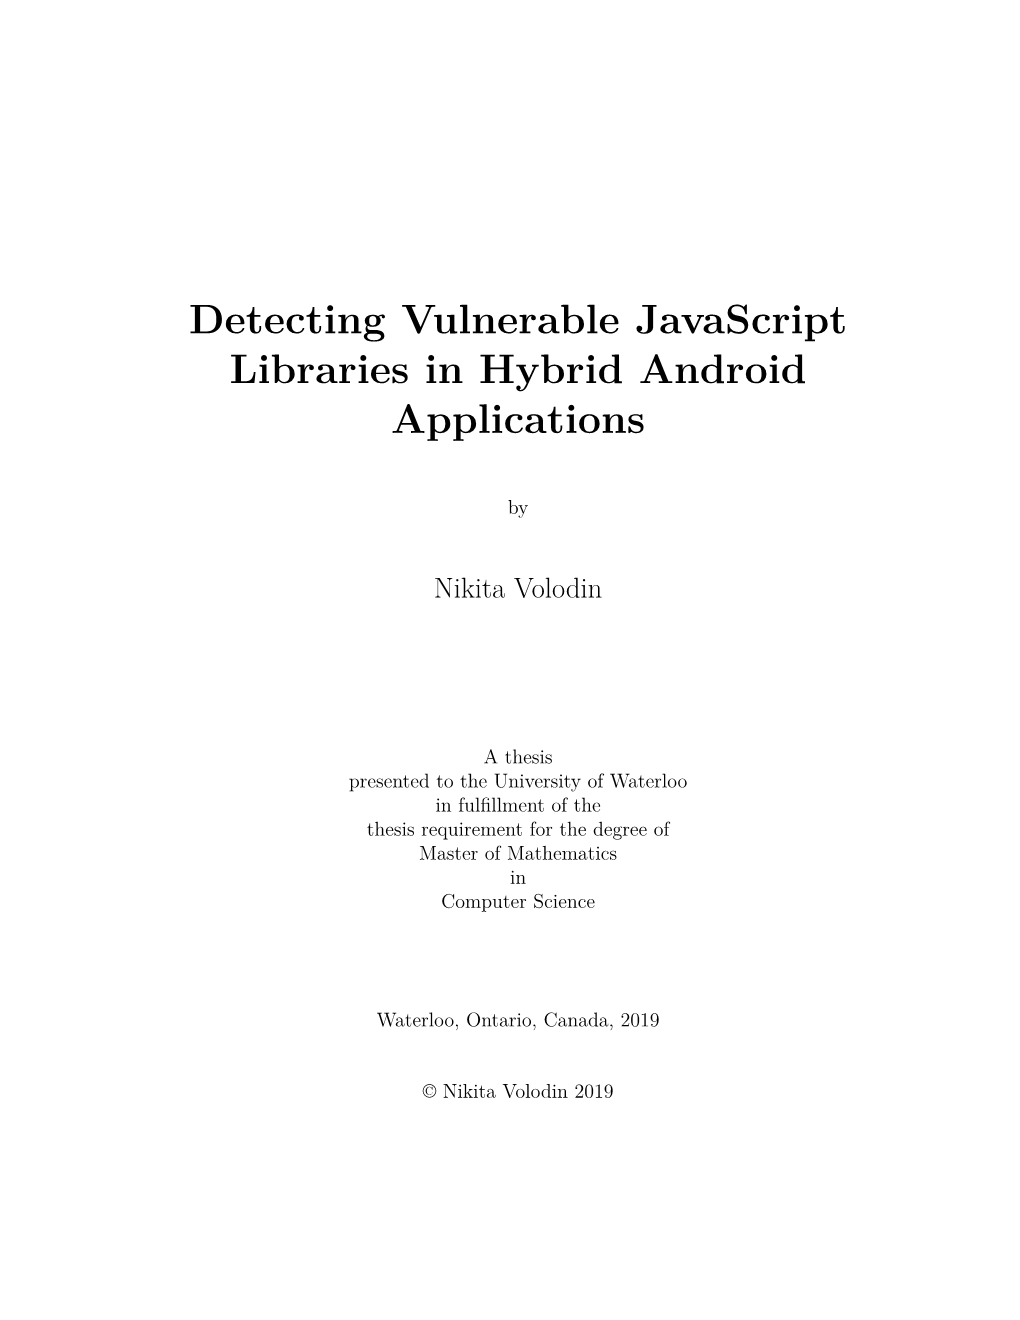 Detecting Vulnerable Javascript Libraries in Hybrid Android Applications